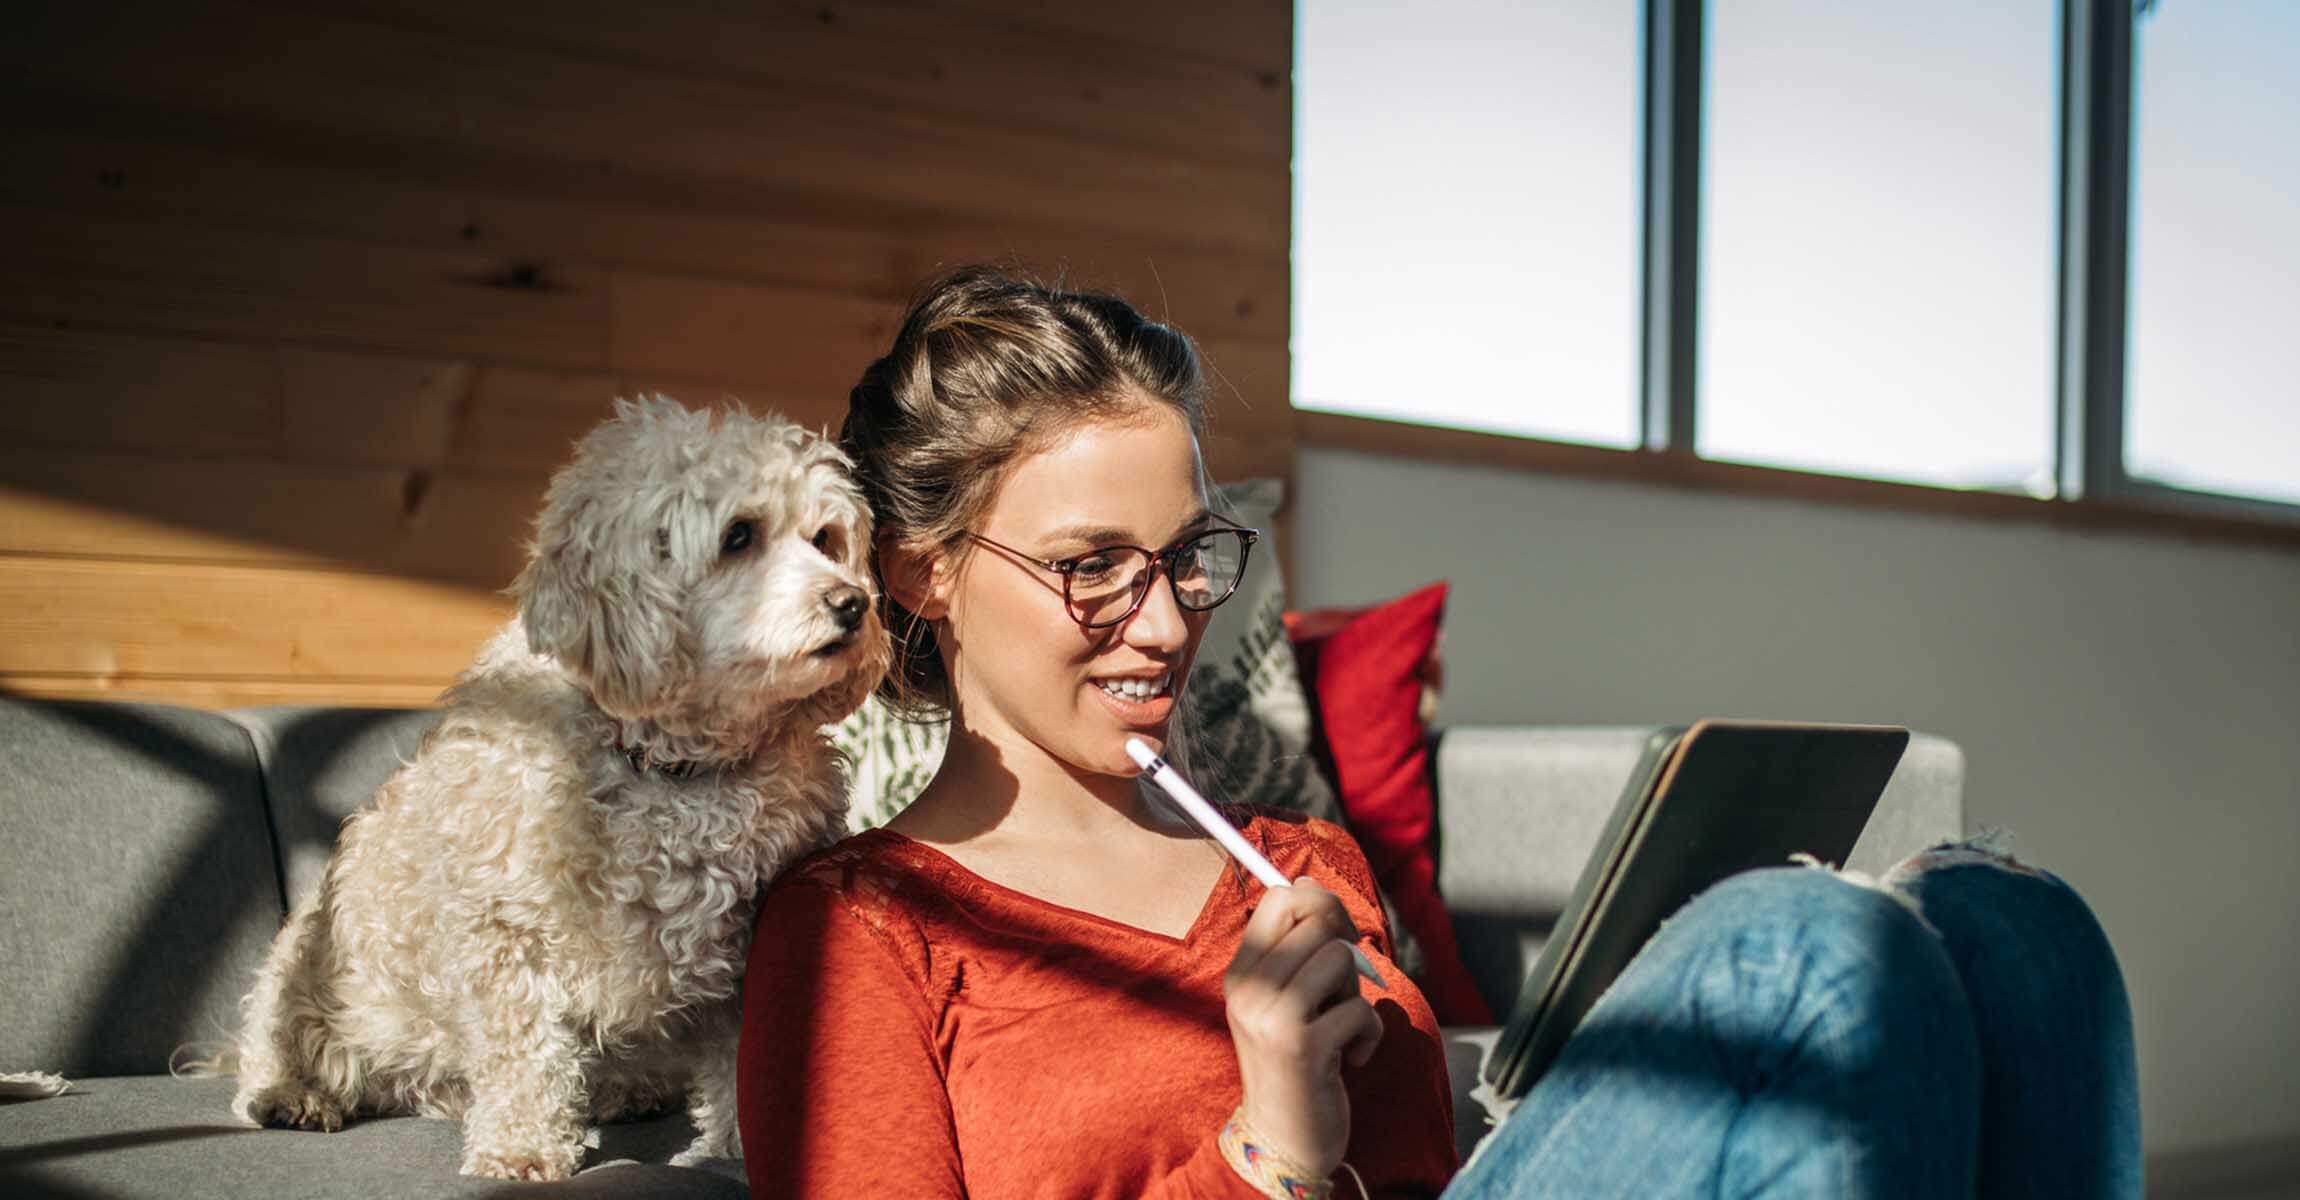 Woman in glasses and her dog looking at an iPad